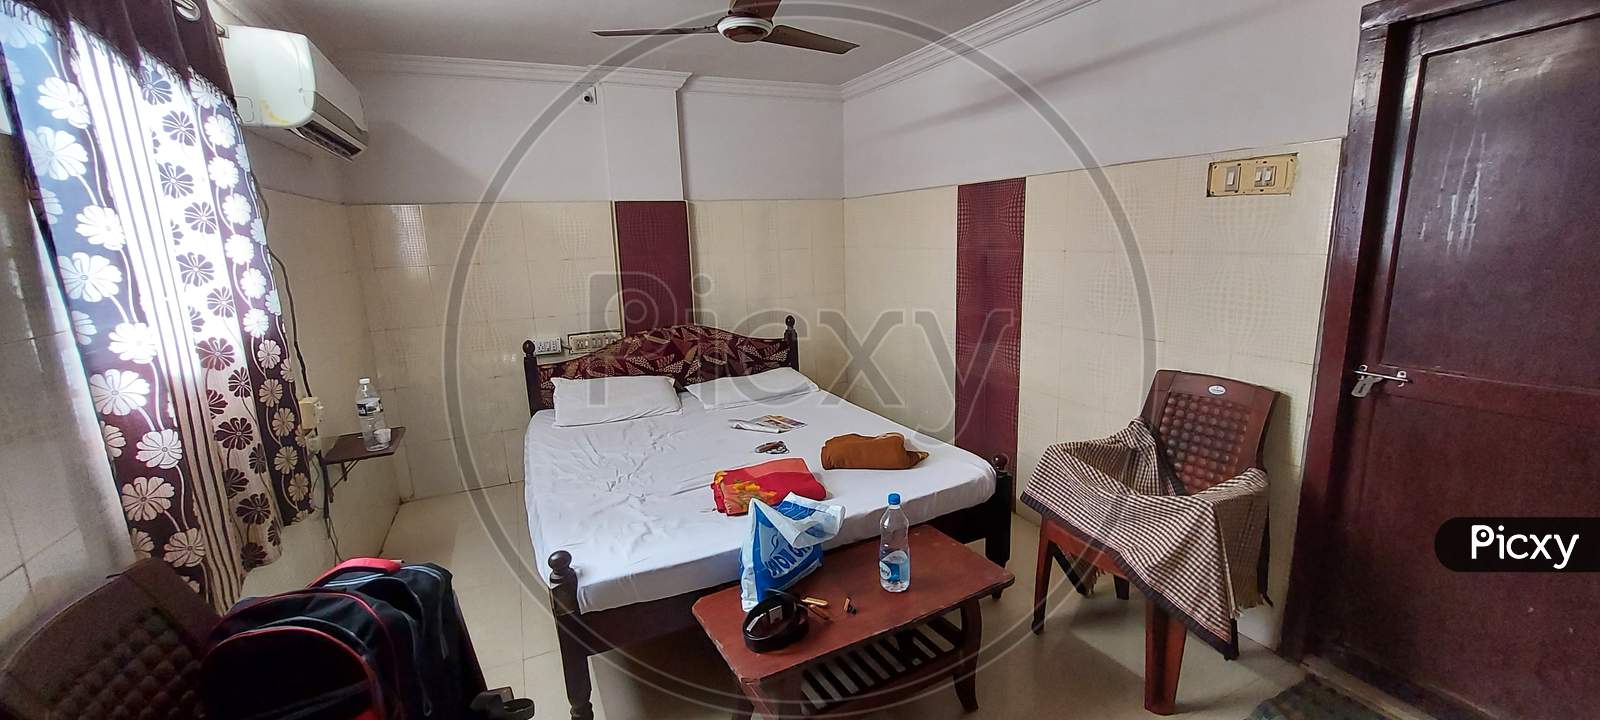 Budget hotel room (500 rupees)in ongole, Andra pradesh, India